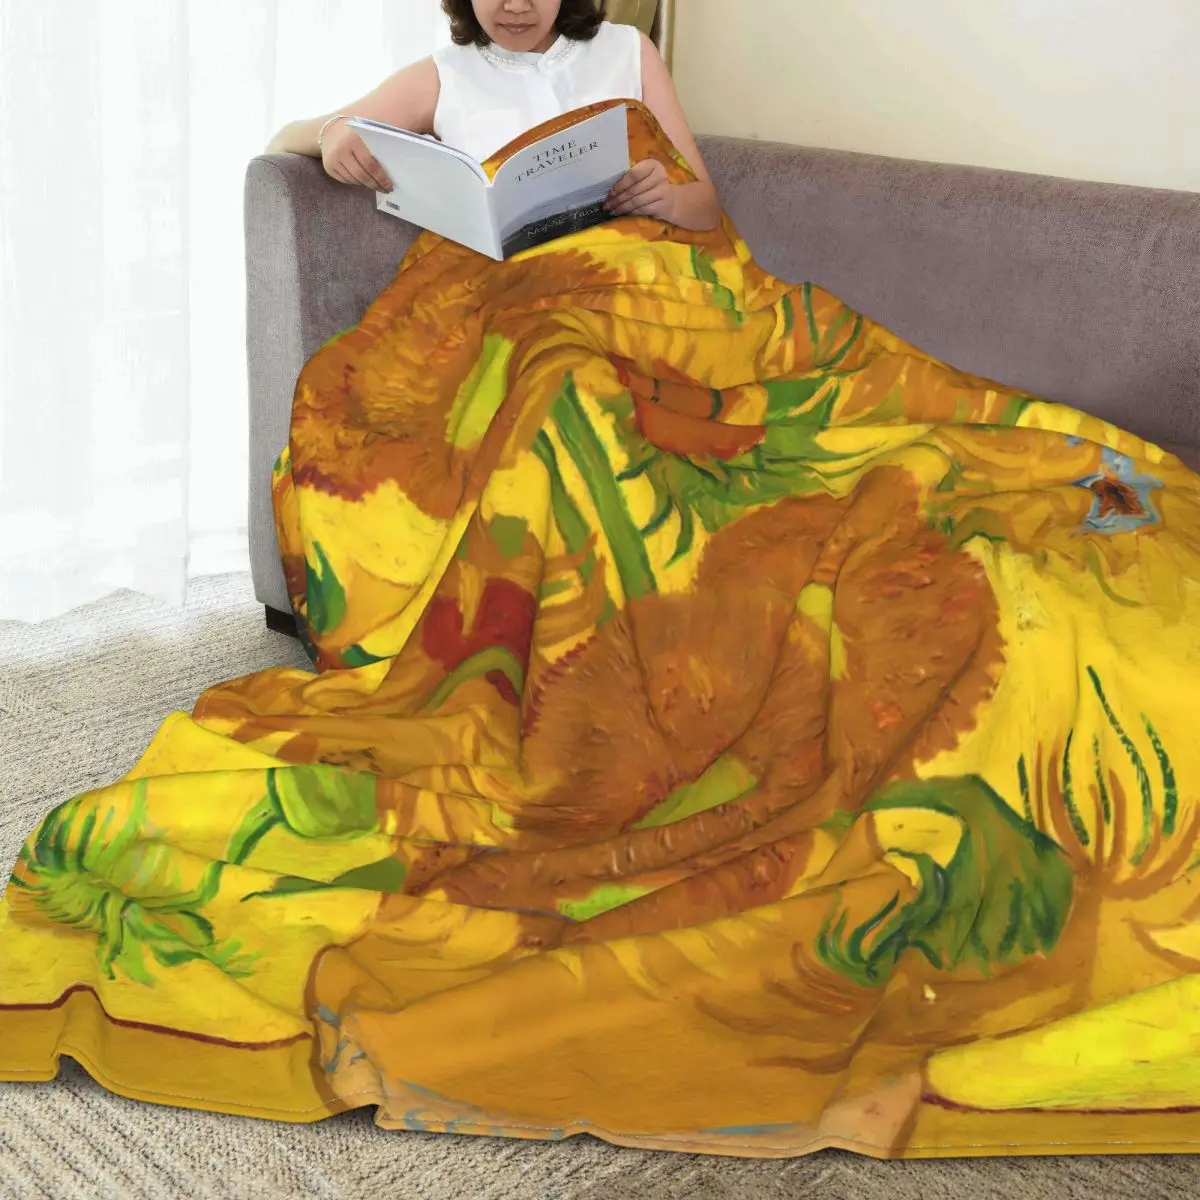 

Van Gogh Super Soft Blanket Sunflowers In A Vase Travelling Throw Blanket Winter Funny Custom Flannel Bedspread Sofa Bed Cover